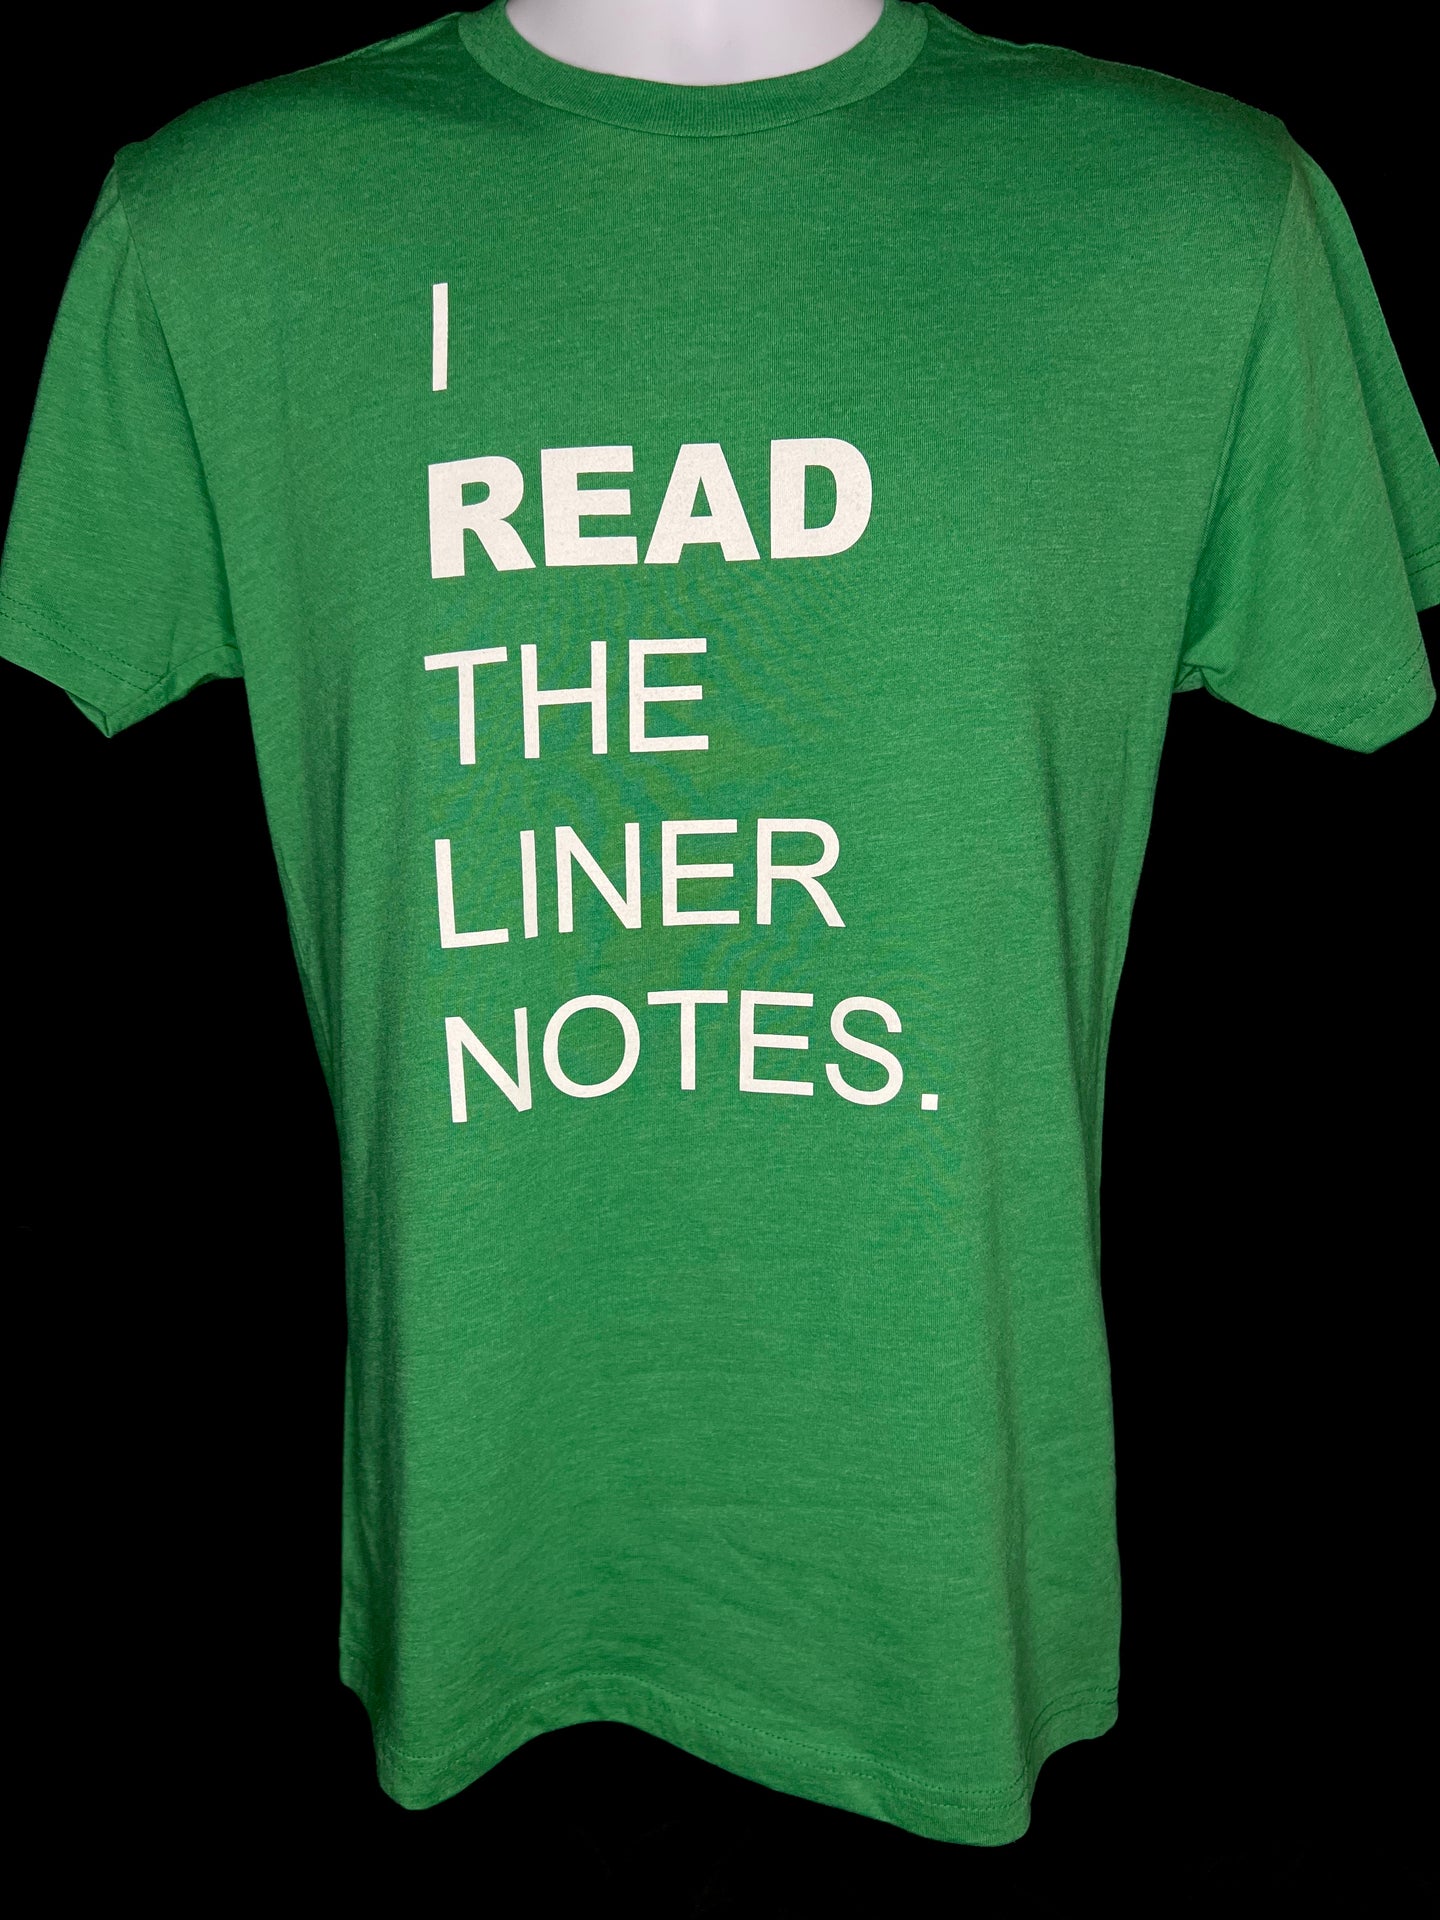 I Read The Liner Notes.® - Kelly Green T-Shirt (Unisex)